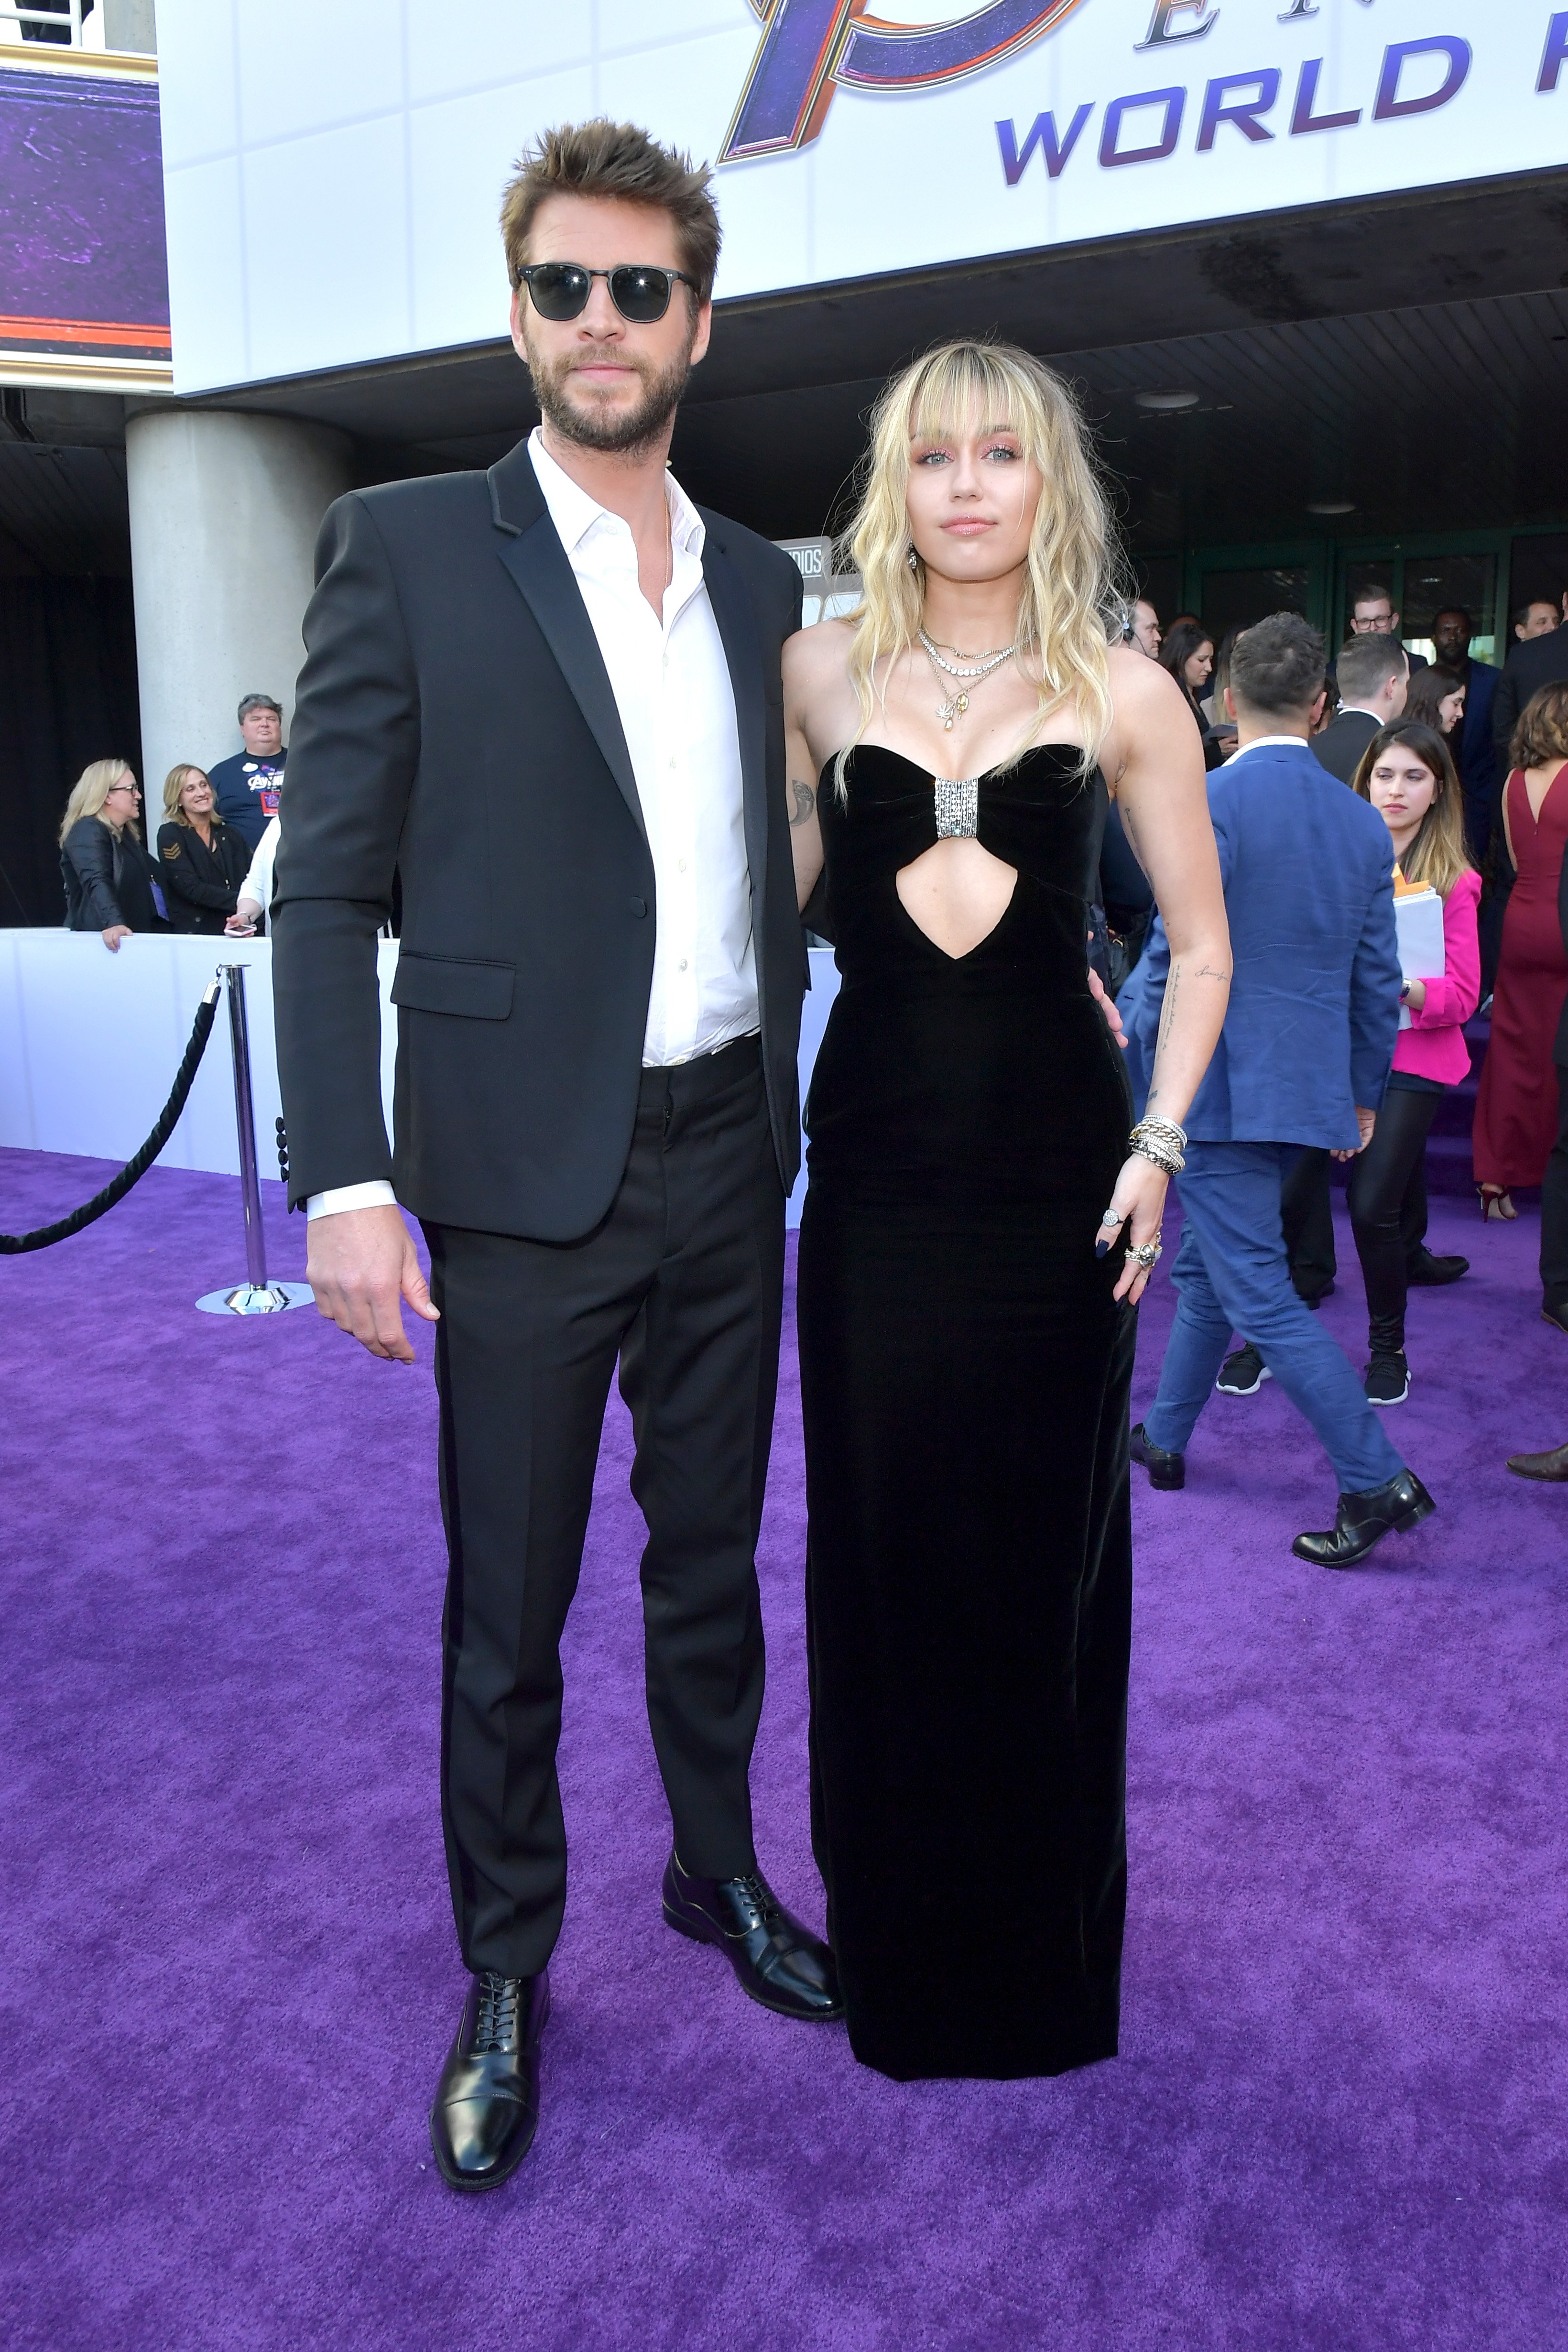 Liam Hemsworth and Miley Cyrus at the world premiere of Walt Disney Studios Motion Pictures "Avengers: Endgame" at the Los Angeles Convention Center on April 22, 2019 in California | Photo: Getty Images